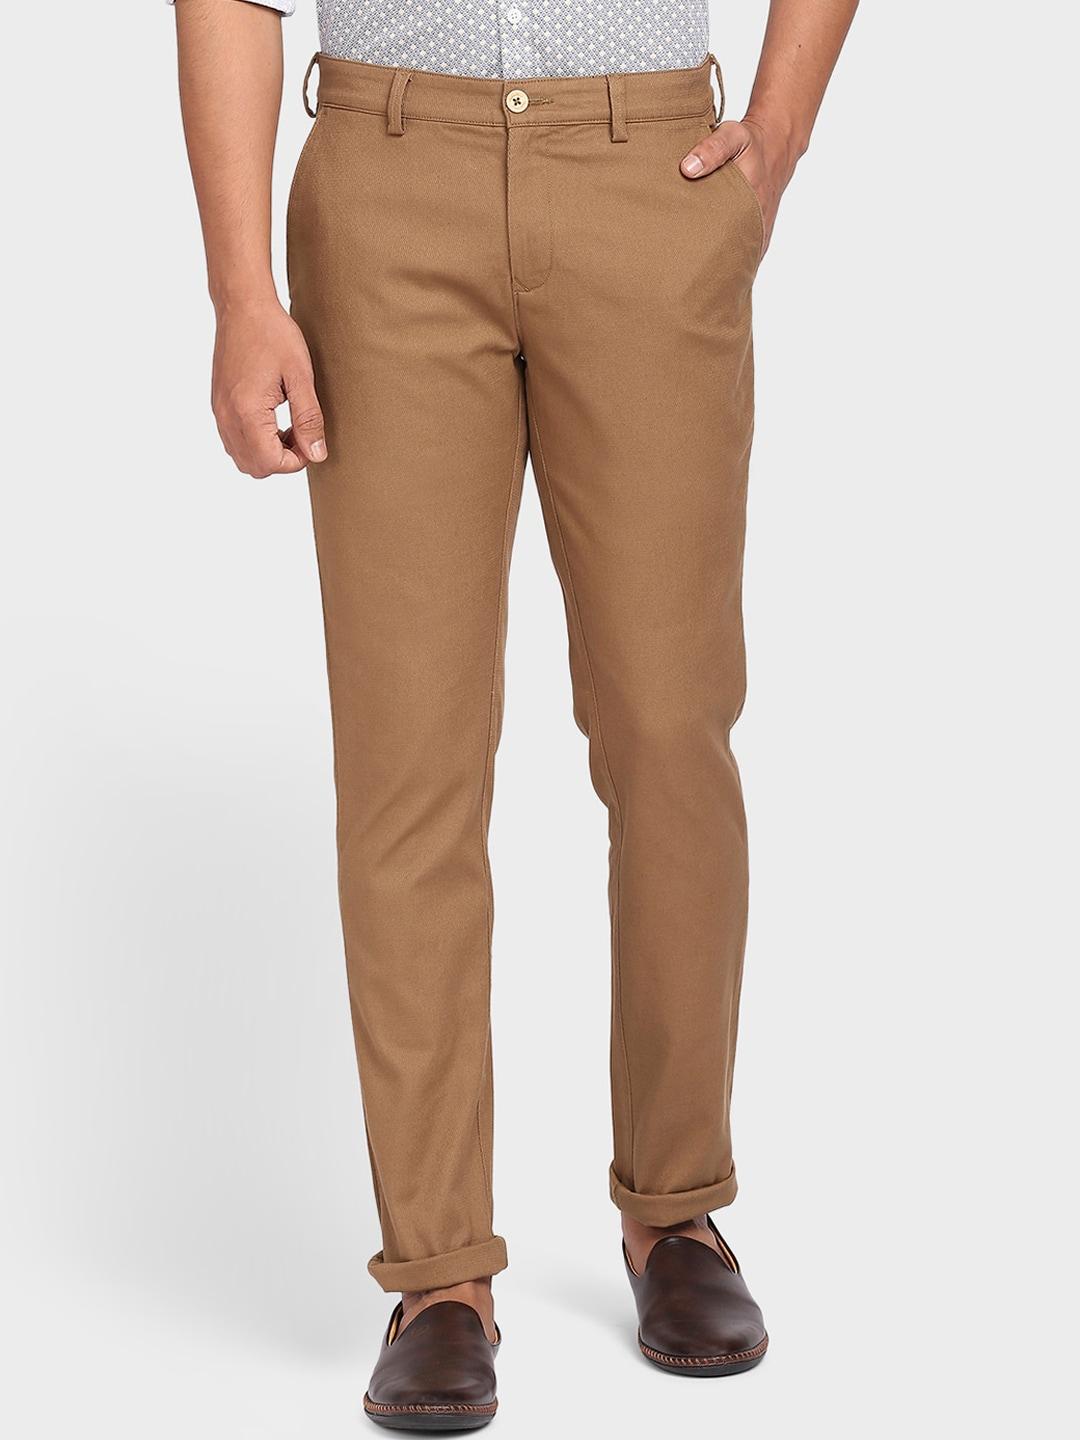 colorplus men brown chinos trousers